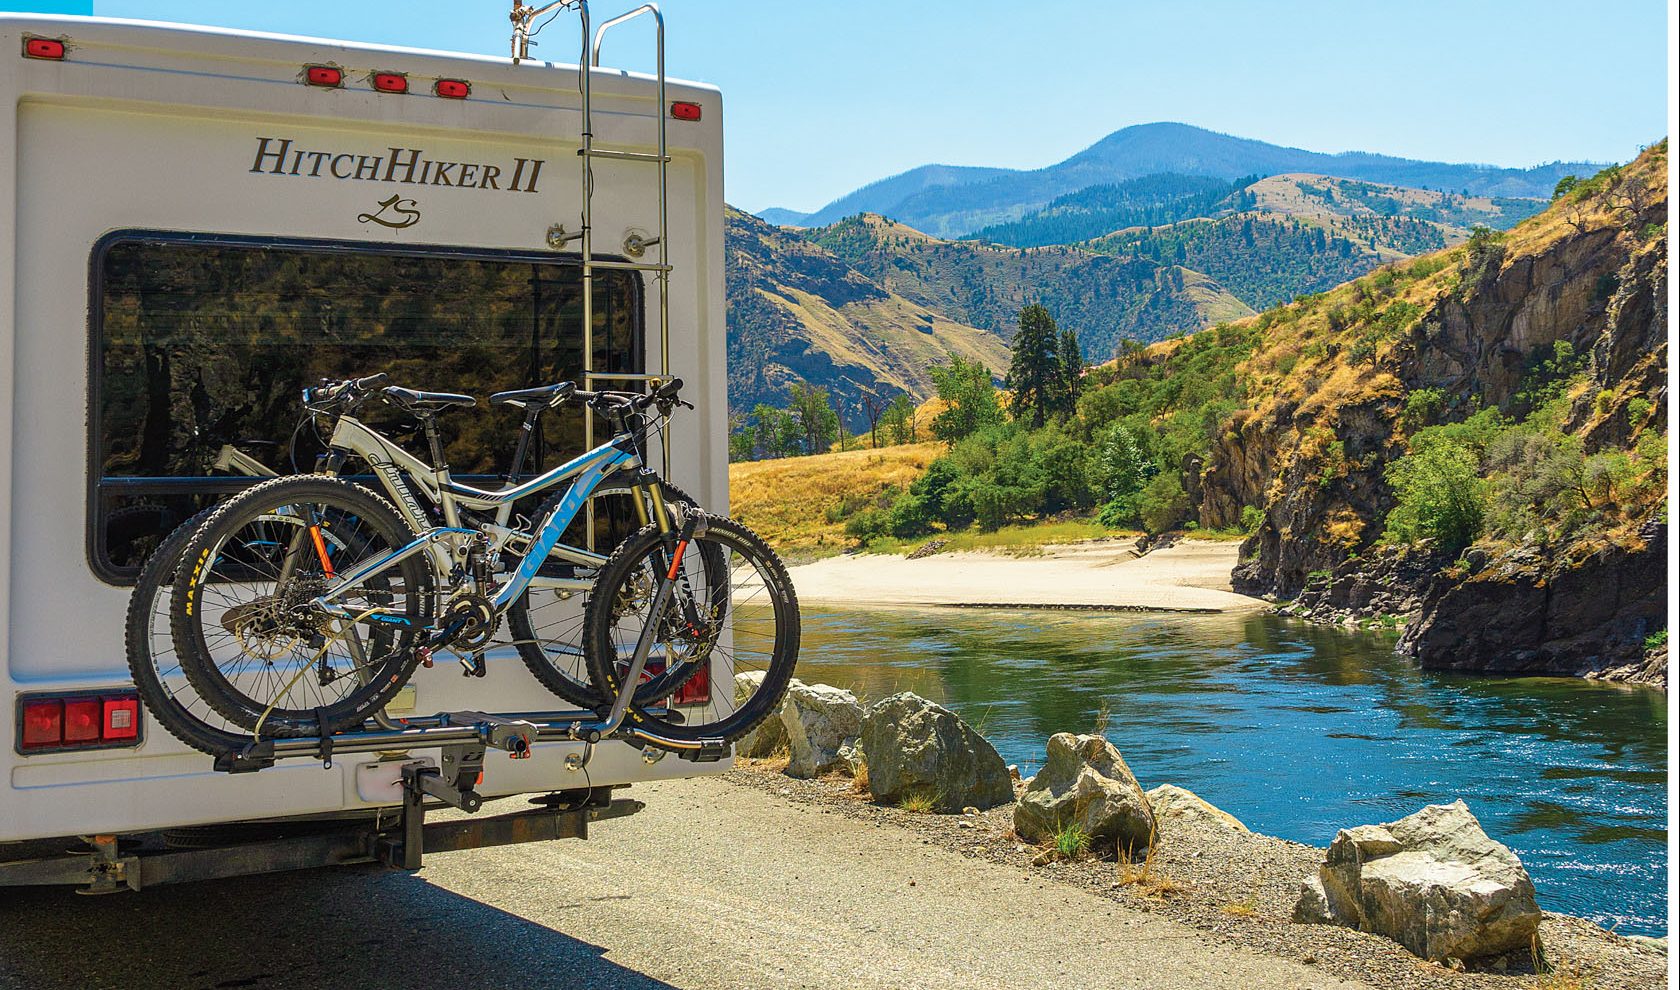 Beat The Heat in Your RV This Summer